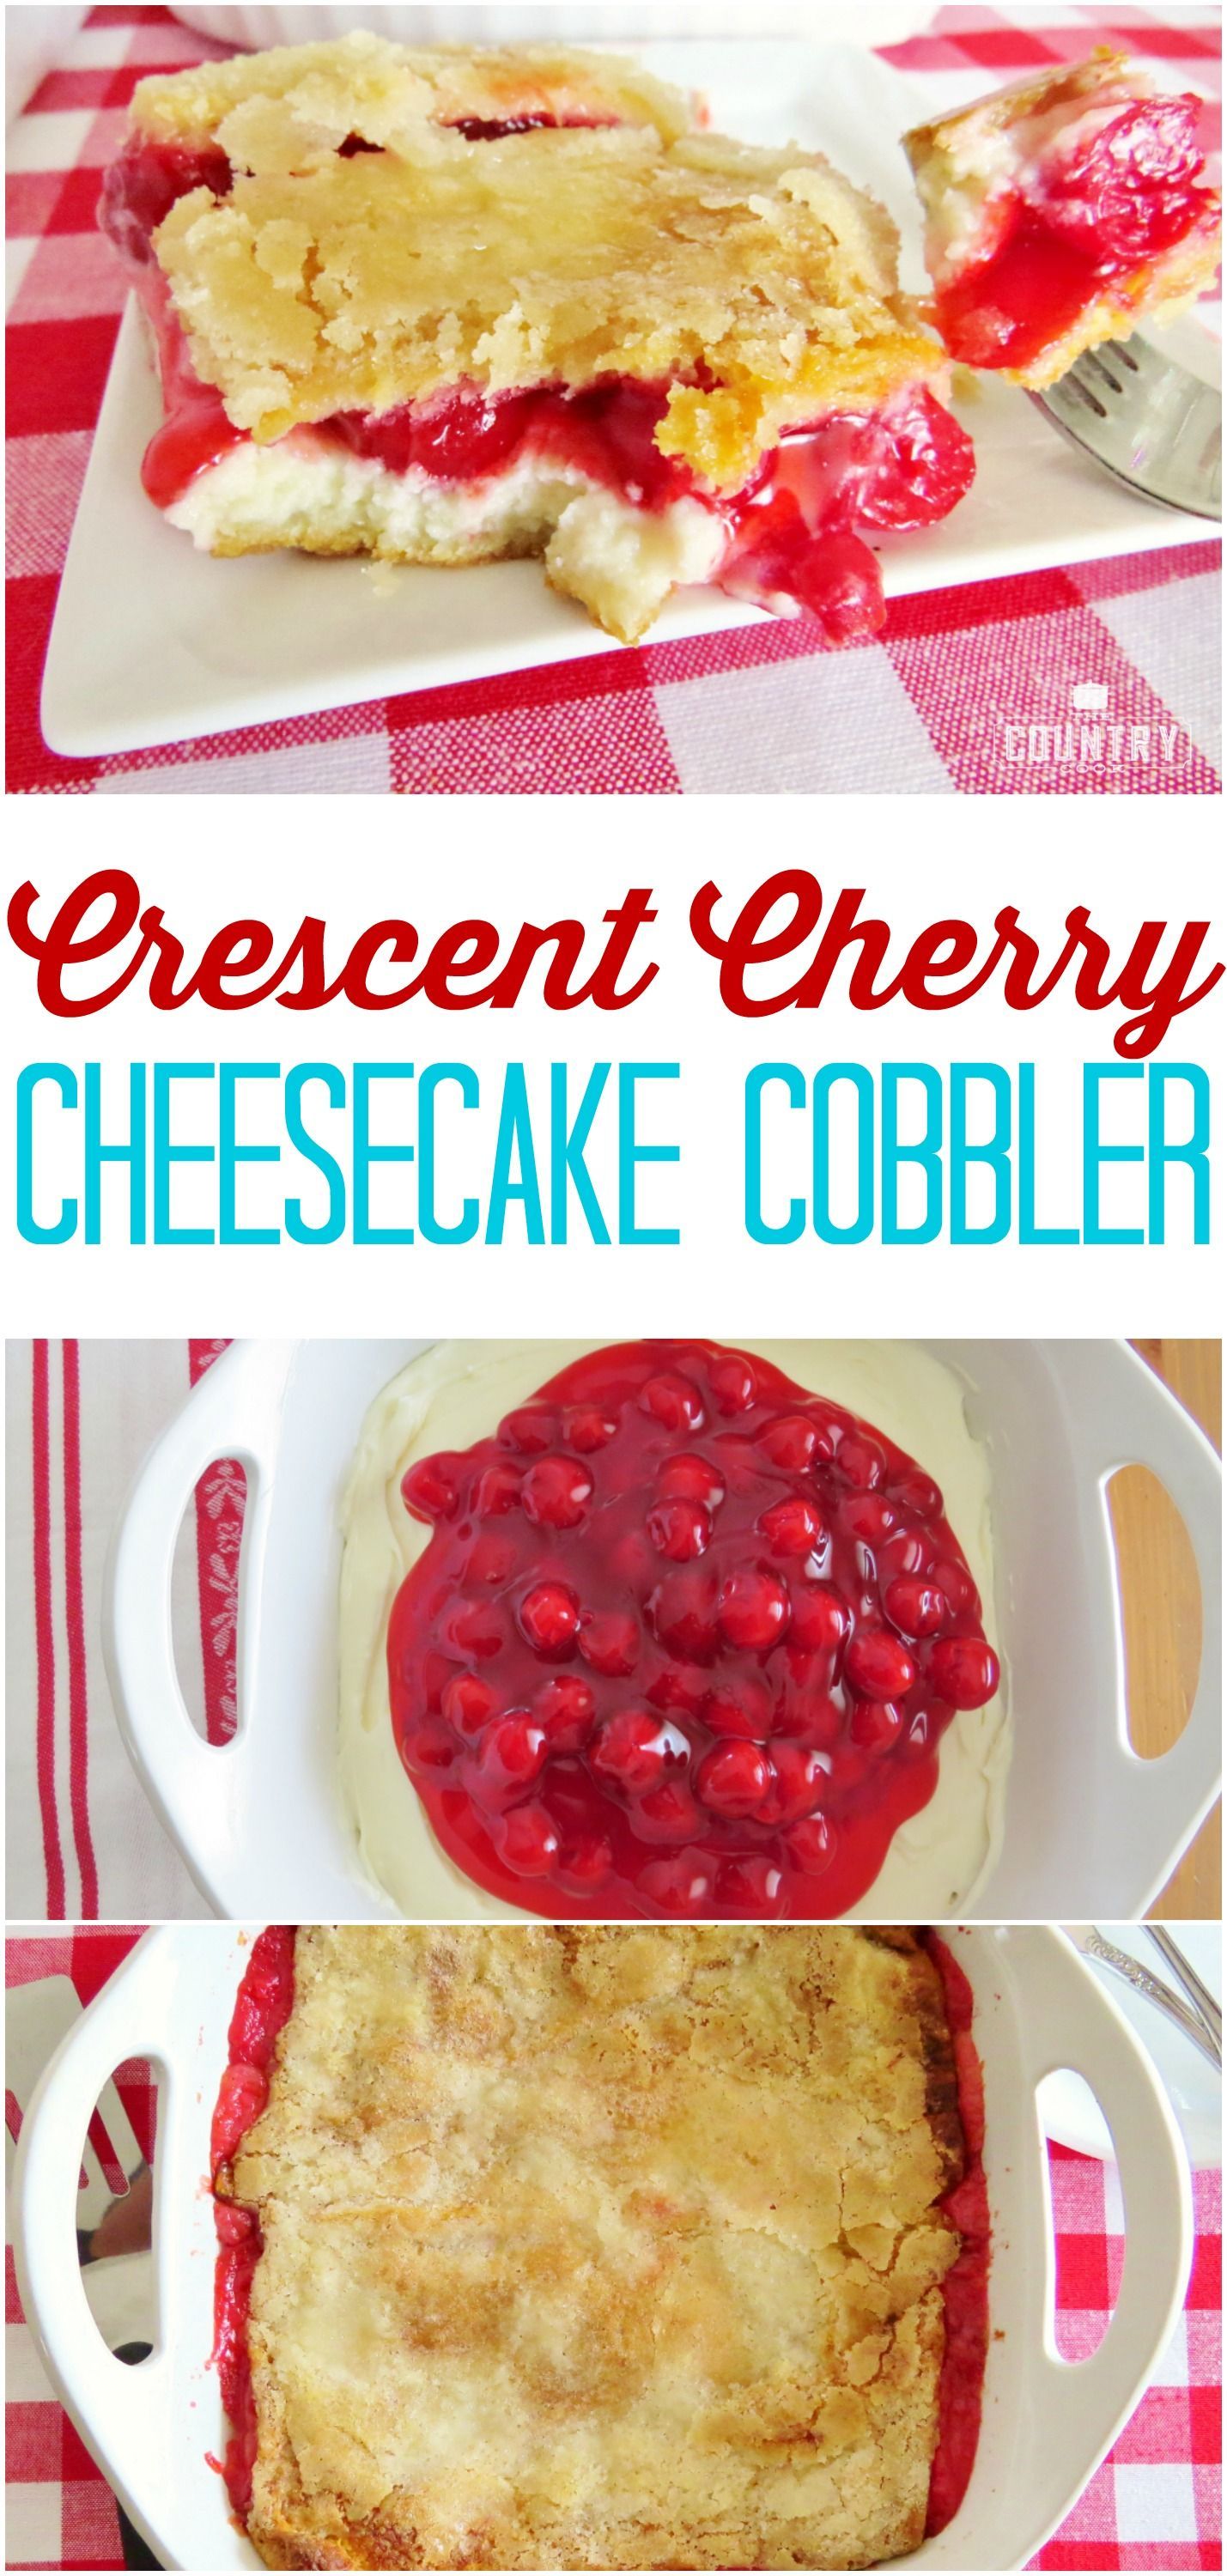 Crescent Cherry Cheesecake Cobbler recipe from The Country Cook